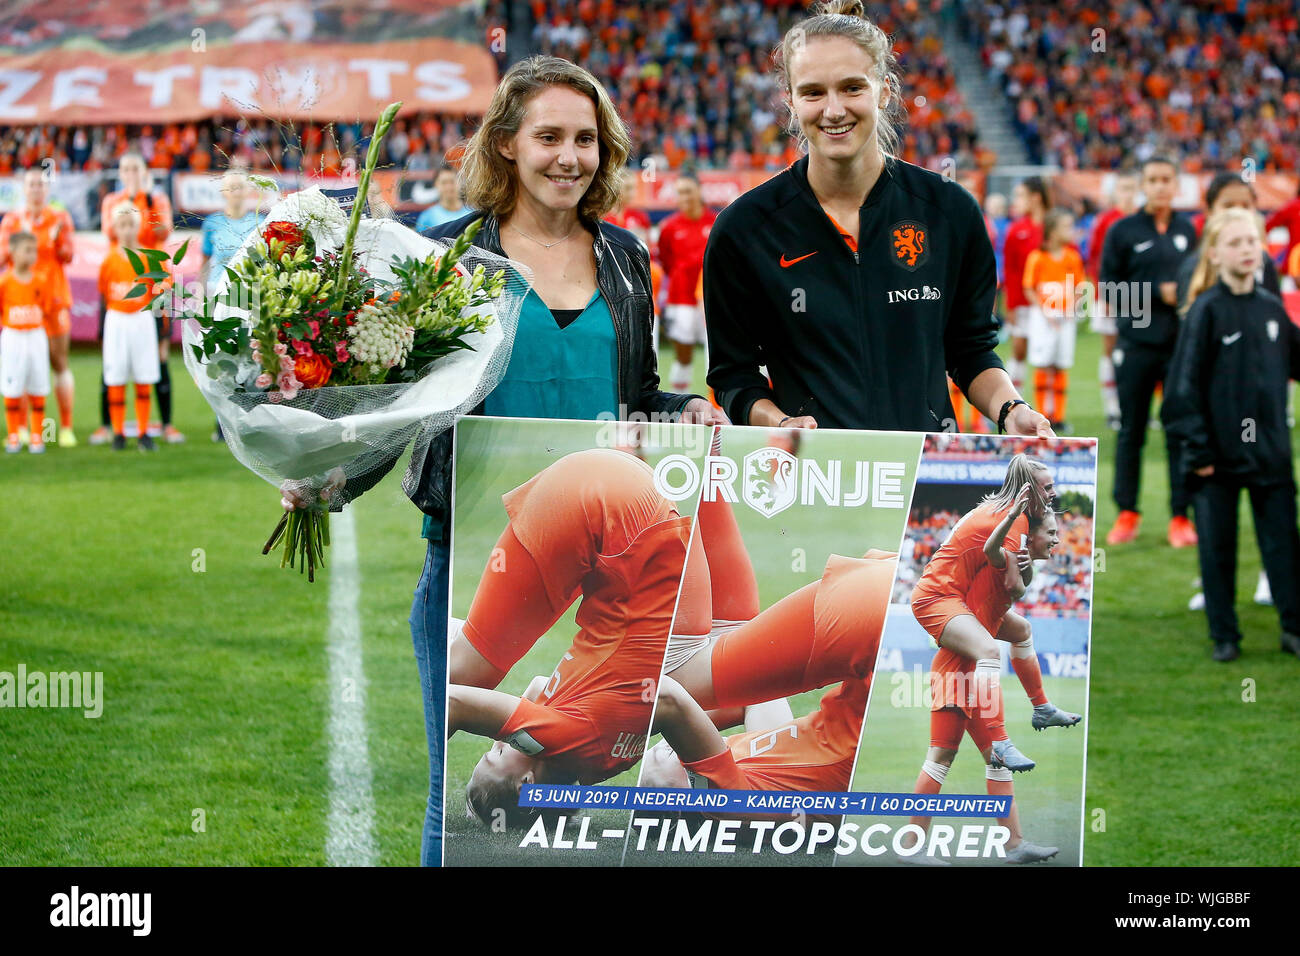 Heerenveen Netherlands 03rd Sep 19 Heerenveen 03 09 19 Abe Lenstra Stadion Uefa Womenos Euro 21 Qualifiers Netherlands Player Vivianne Miedema R Receives All Time Topscorer Price From Previous Topscorer Manon Melis L Before The